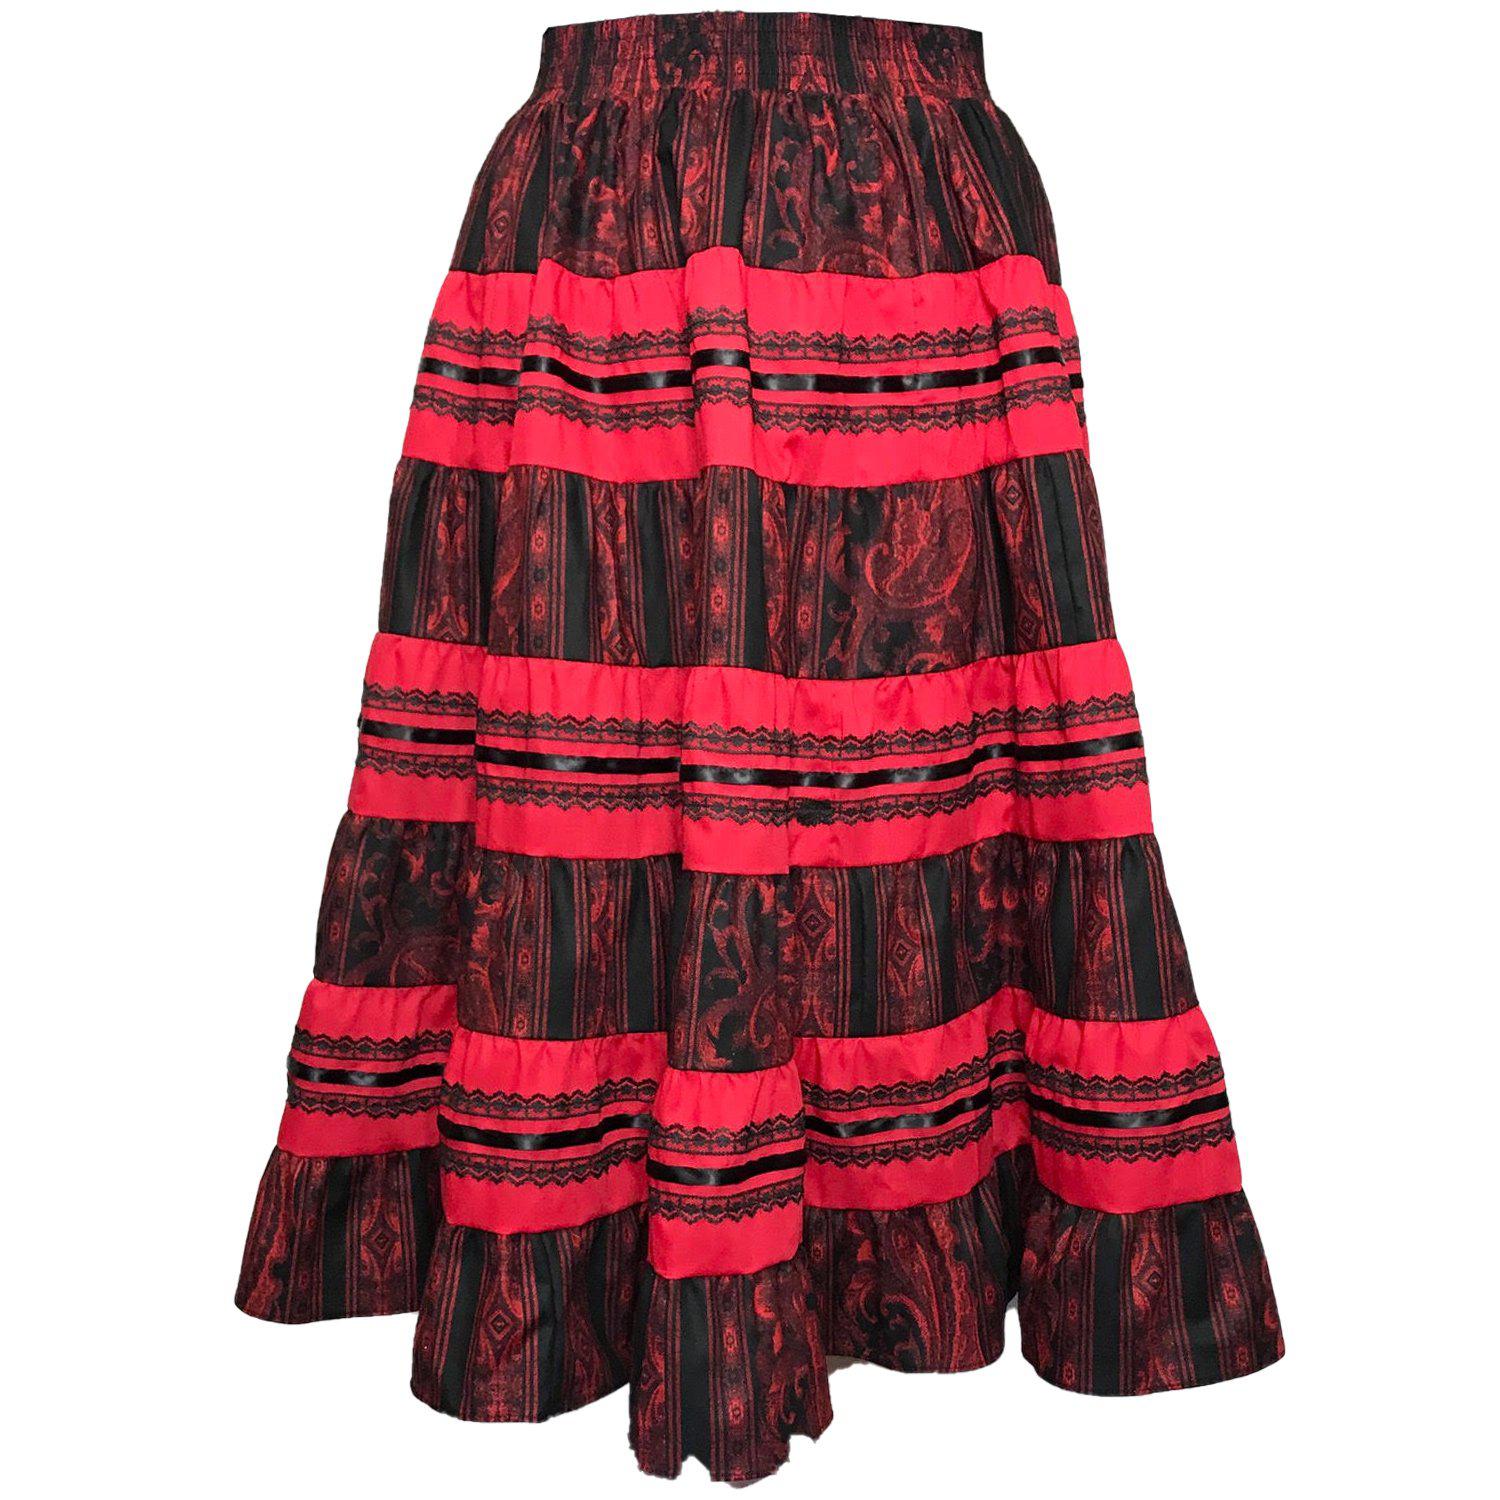 A Regal Print Prairie Skirt with ruffles, perfect for square dancing, from Square Up Fashions.